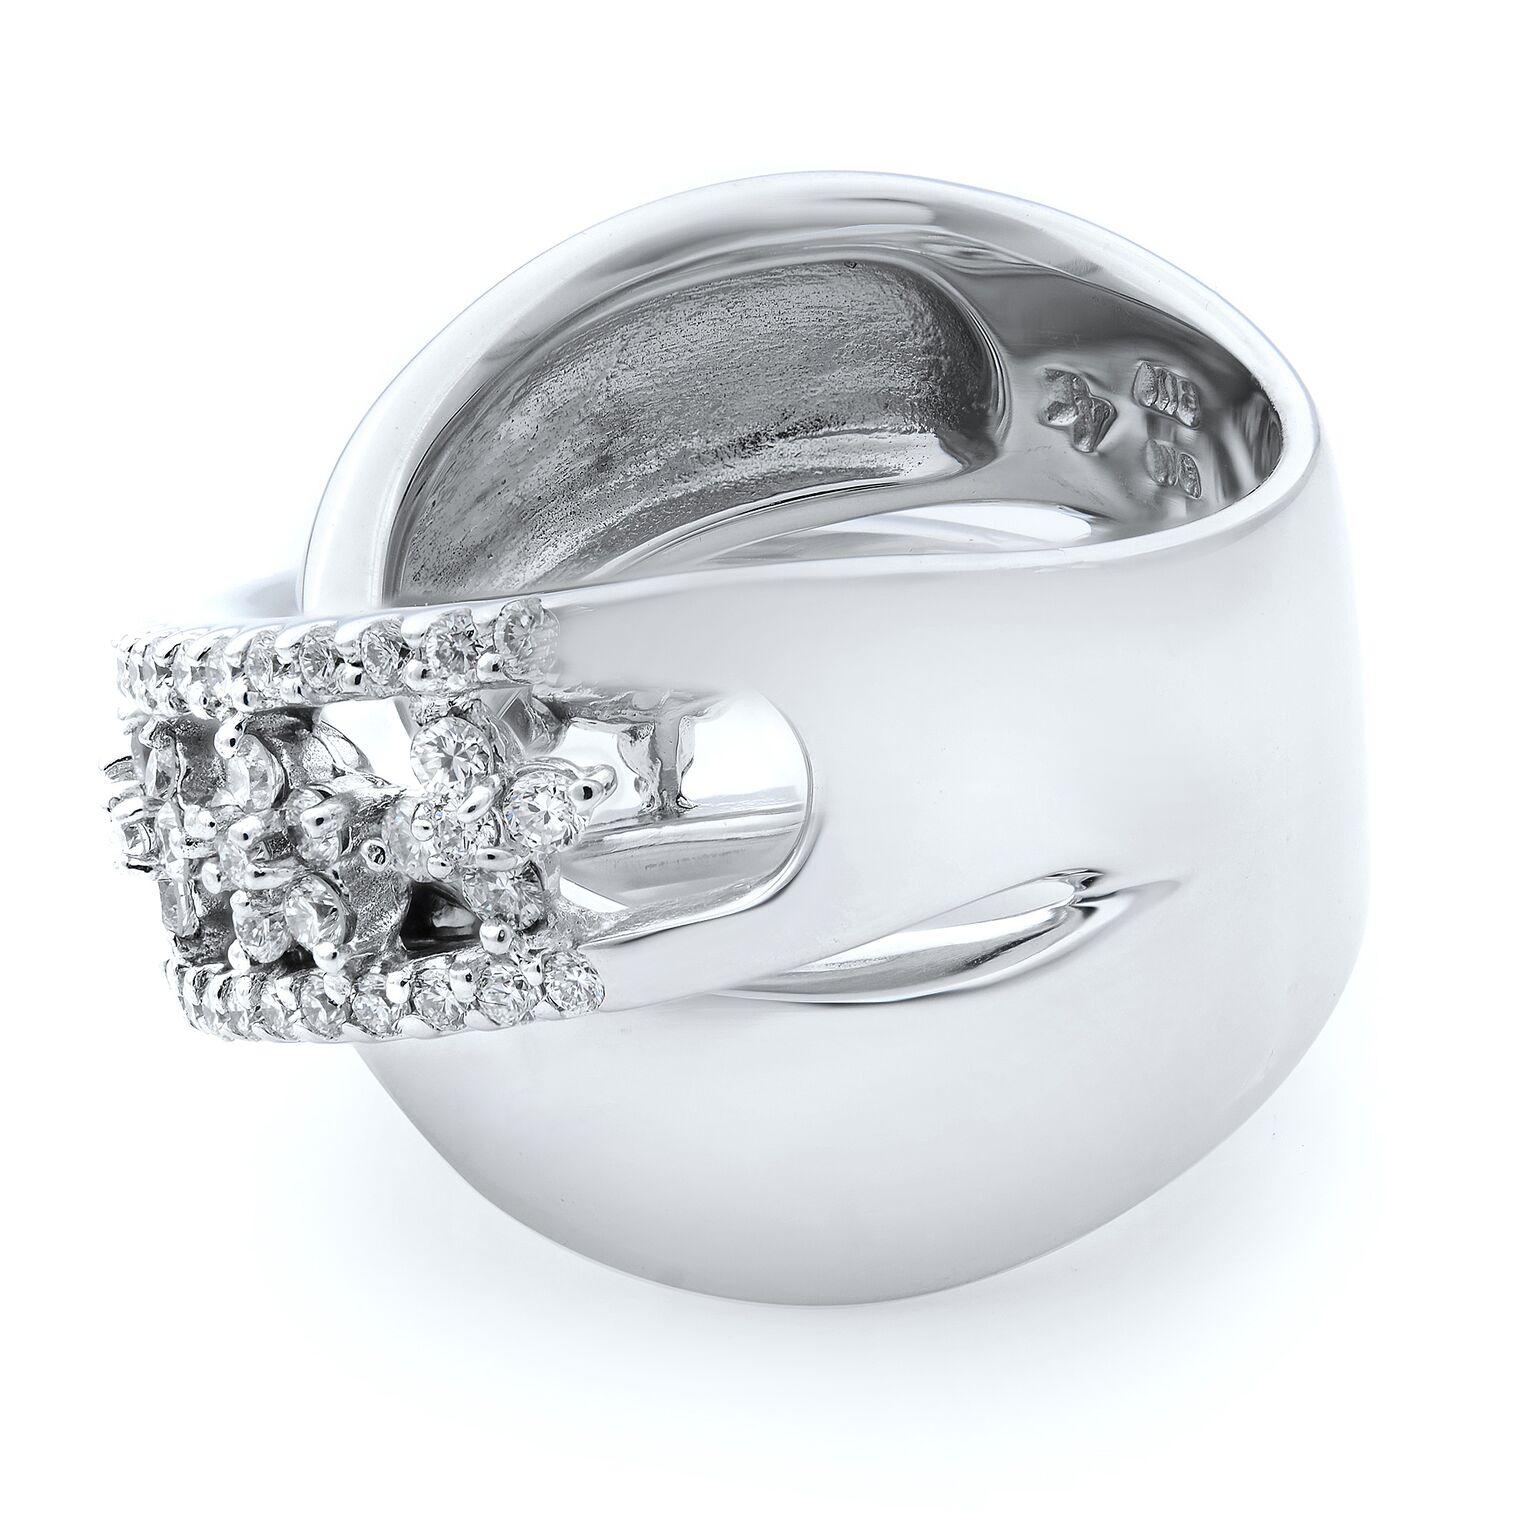 This bold diamond and extremely luxurious thick criss cross ring is crafted in 18k white gold. A huge explosion of brilliance is generated from this stunning diamond band. This band features icy white round cut diamonds weighting 1.00 carat in